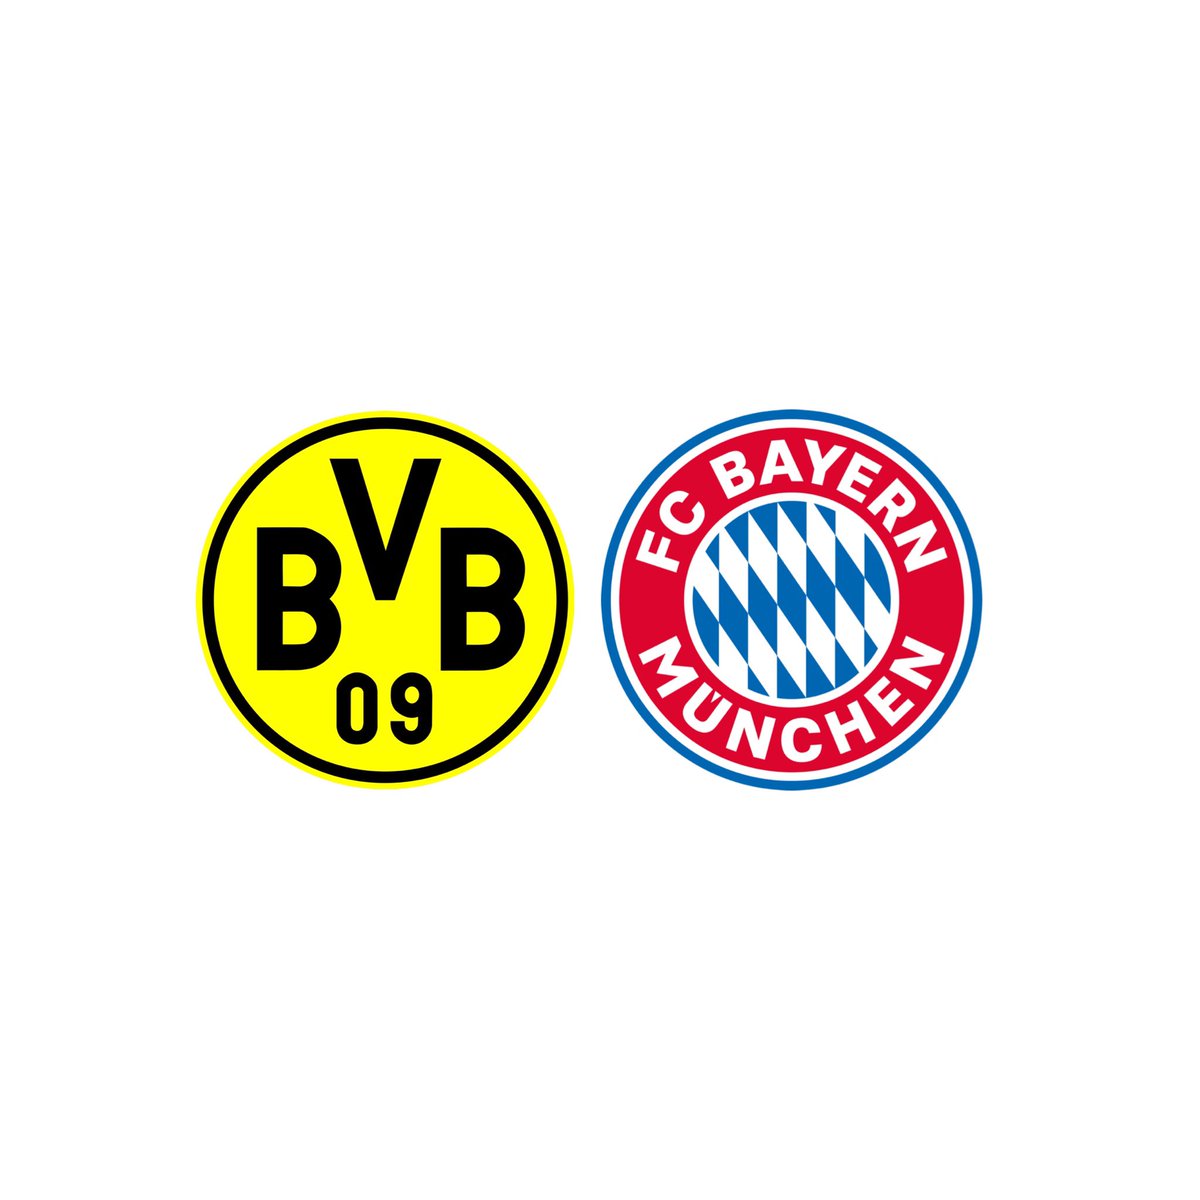 🚨🇩🇪 𝐎𝐅𝐅𝐈𝐂𝐈𝐀𝐋 | Following Bayern's 3-1 loss to RB Leipzig, if Dortmund win their last 2 games, they will WIN the Bundesliga! 

BVB play Augsburg (A) tomorrow, and then Mainz (H). Crazy twist to title race...